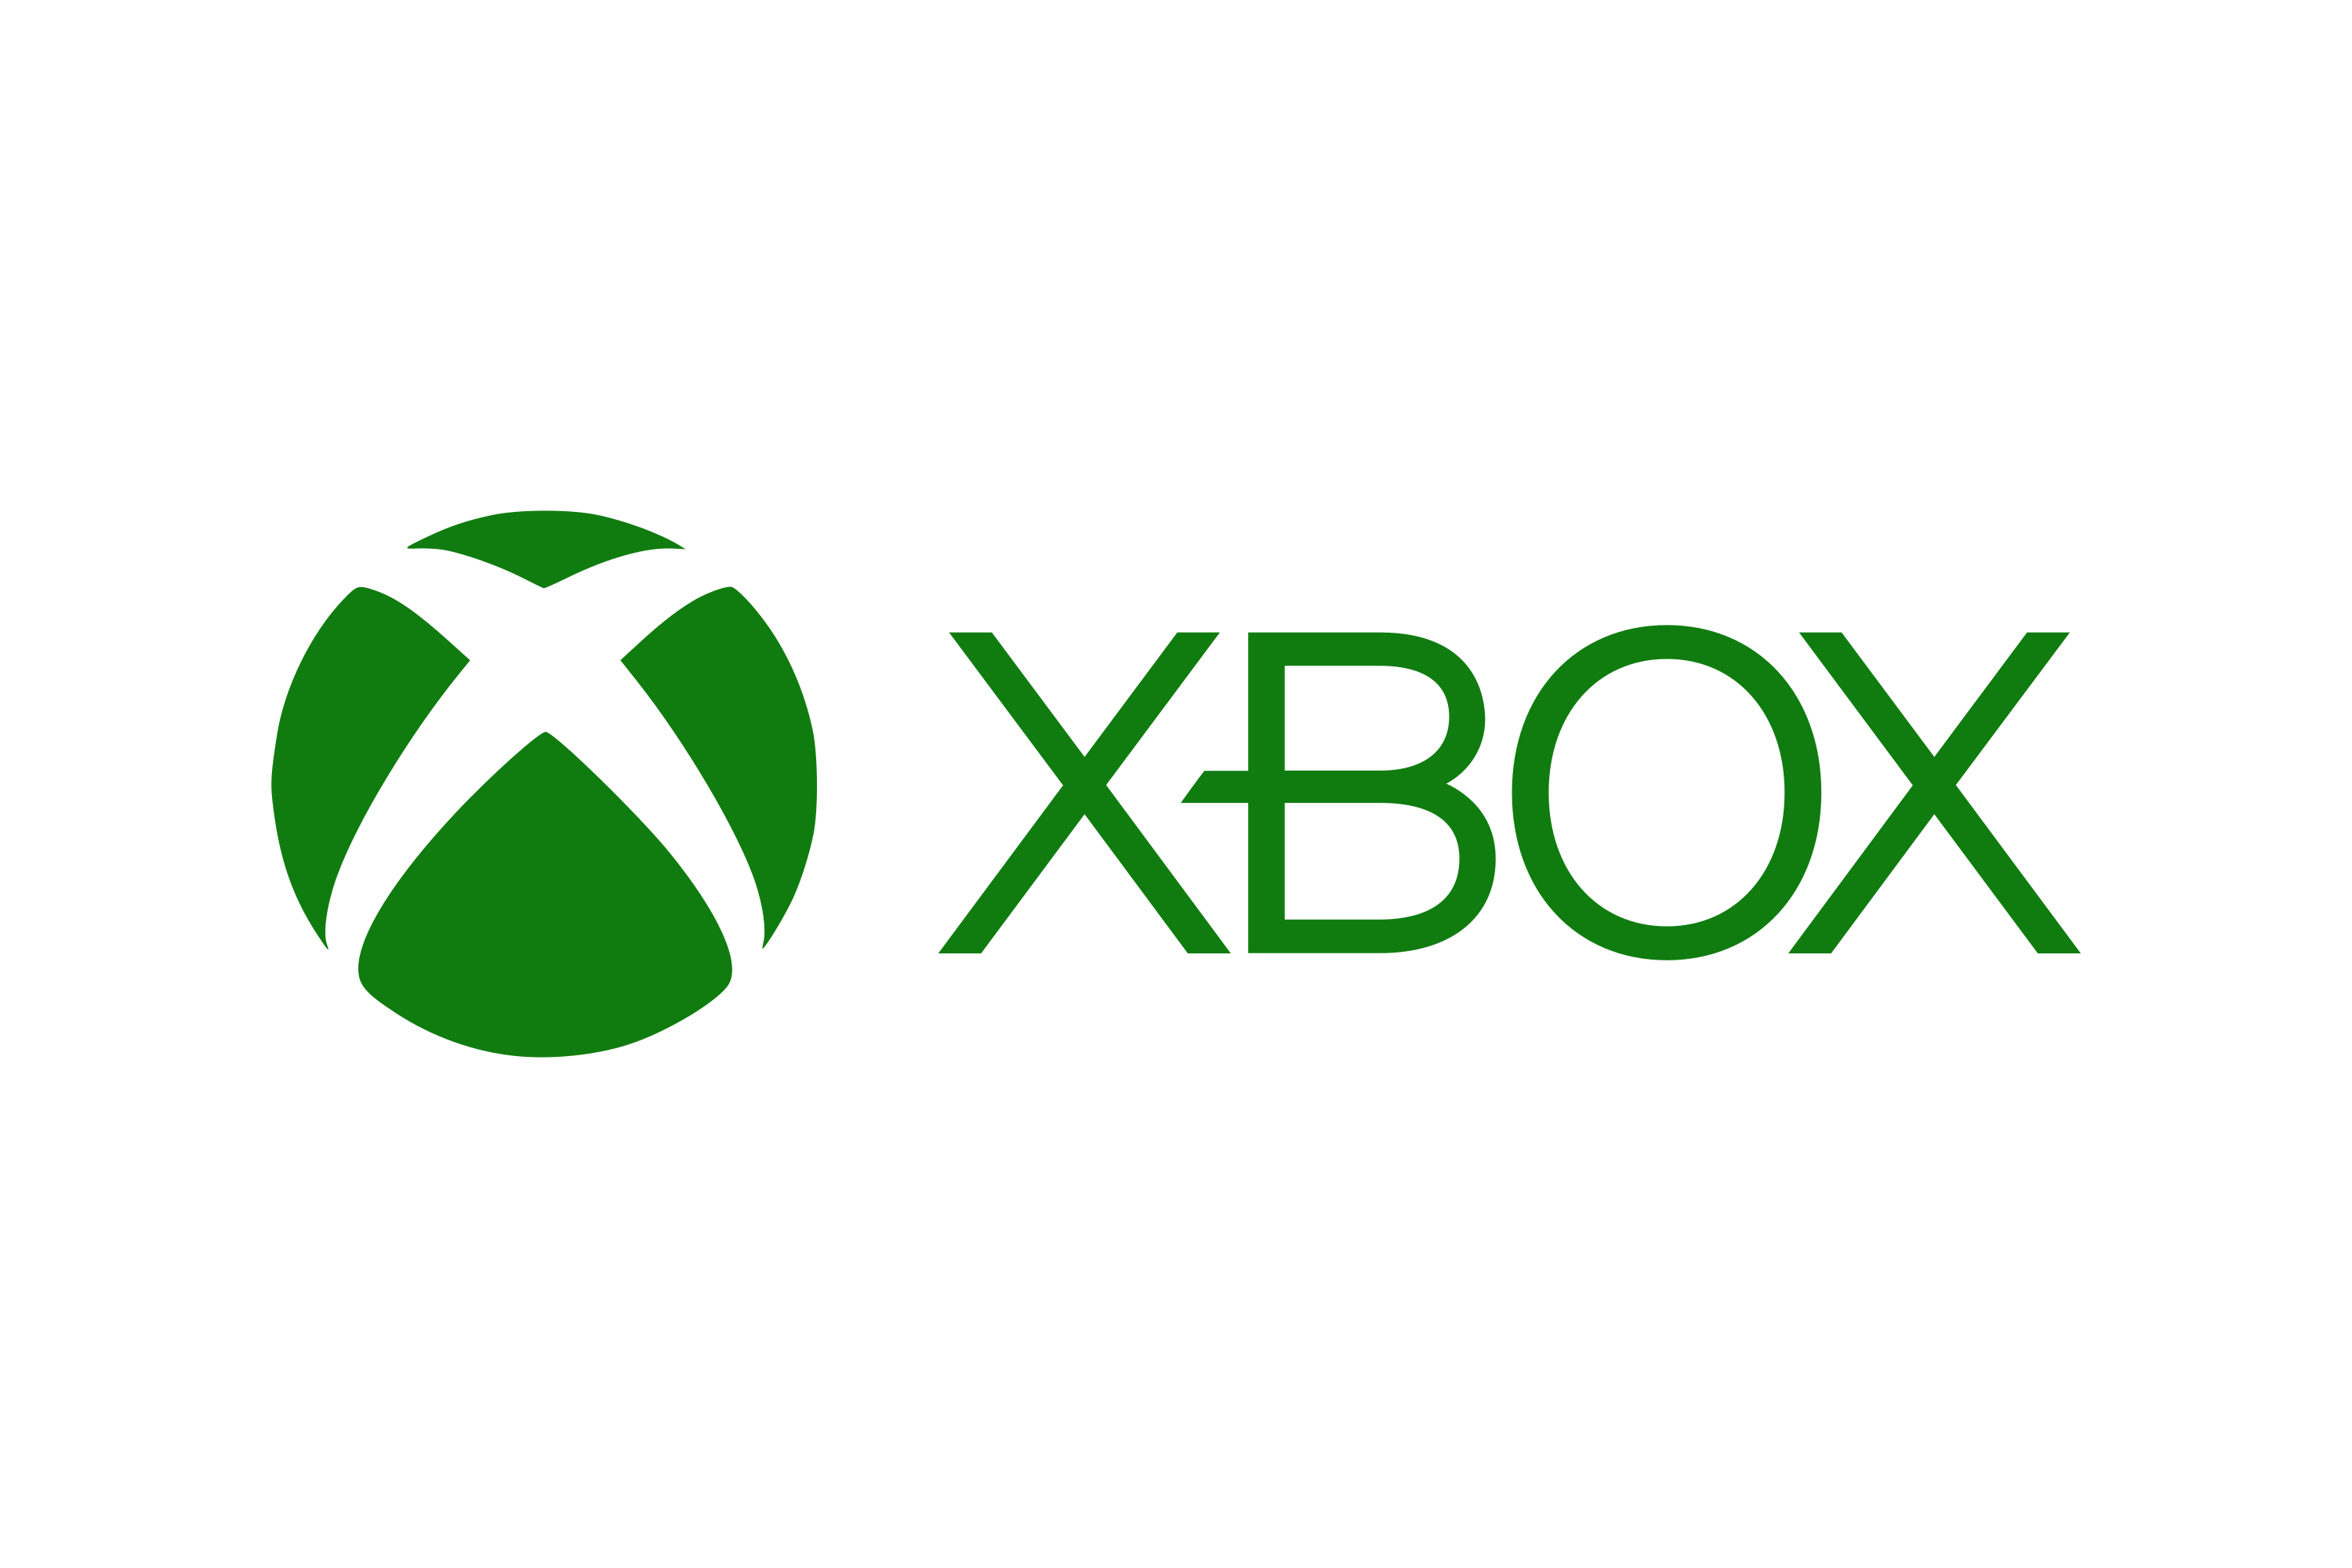 Download Xbox Logo in SVG Vector or PNG File Format - Logo.wine